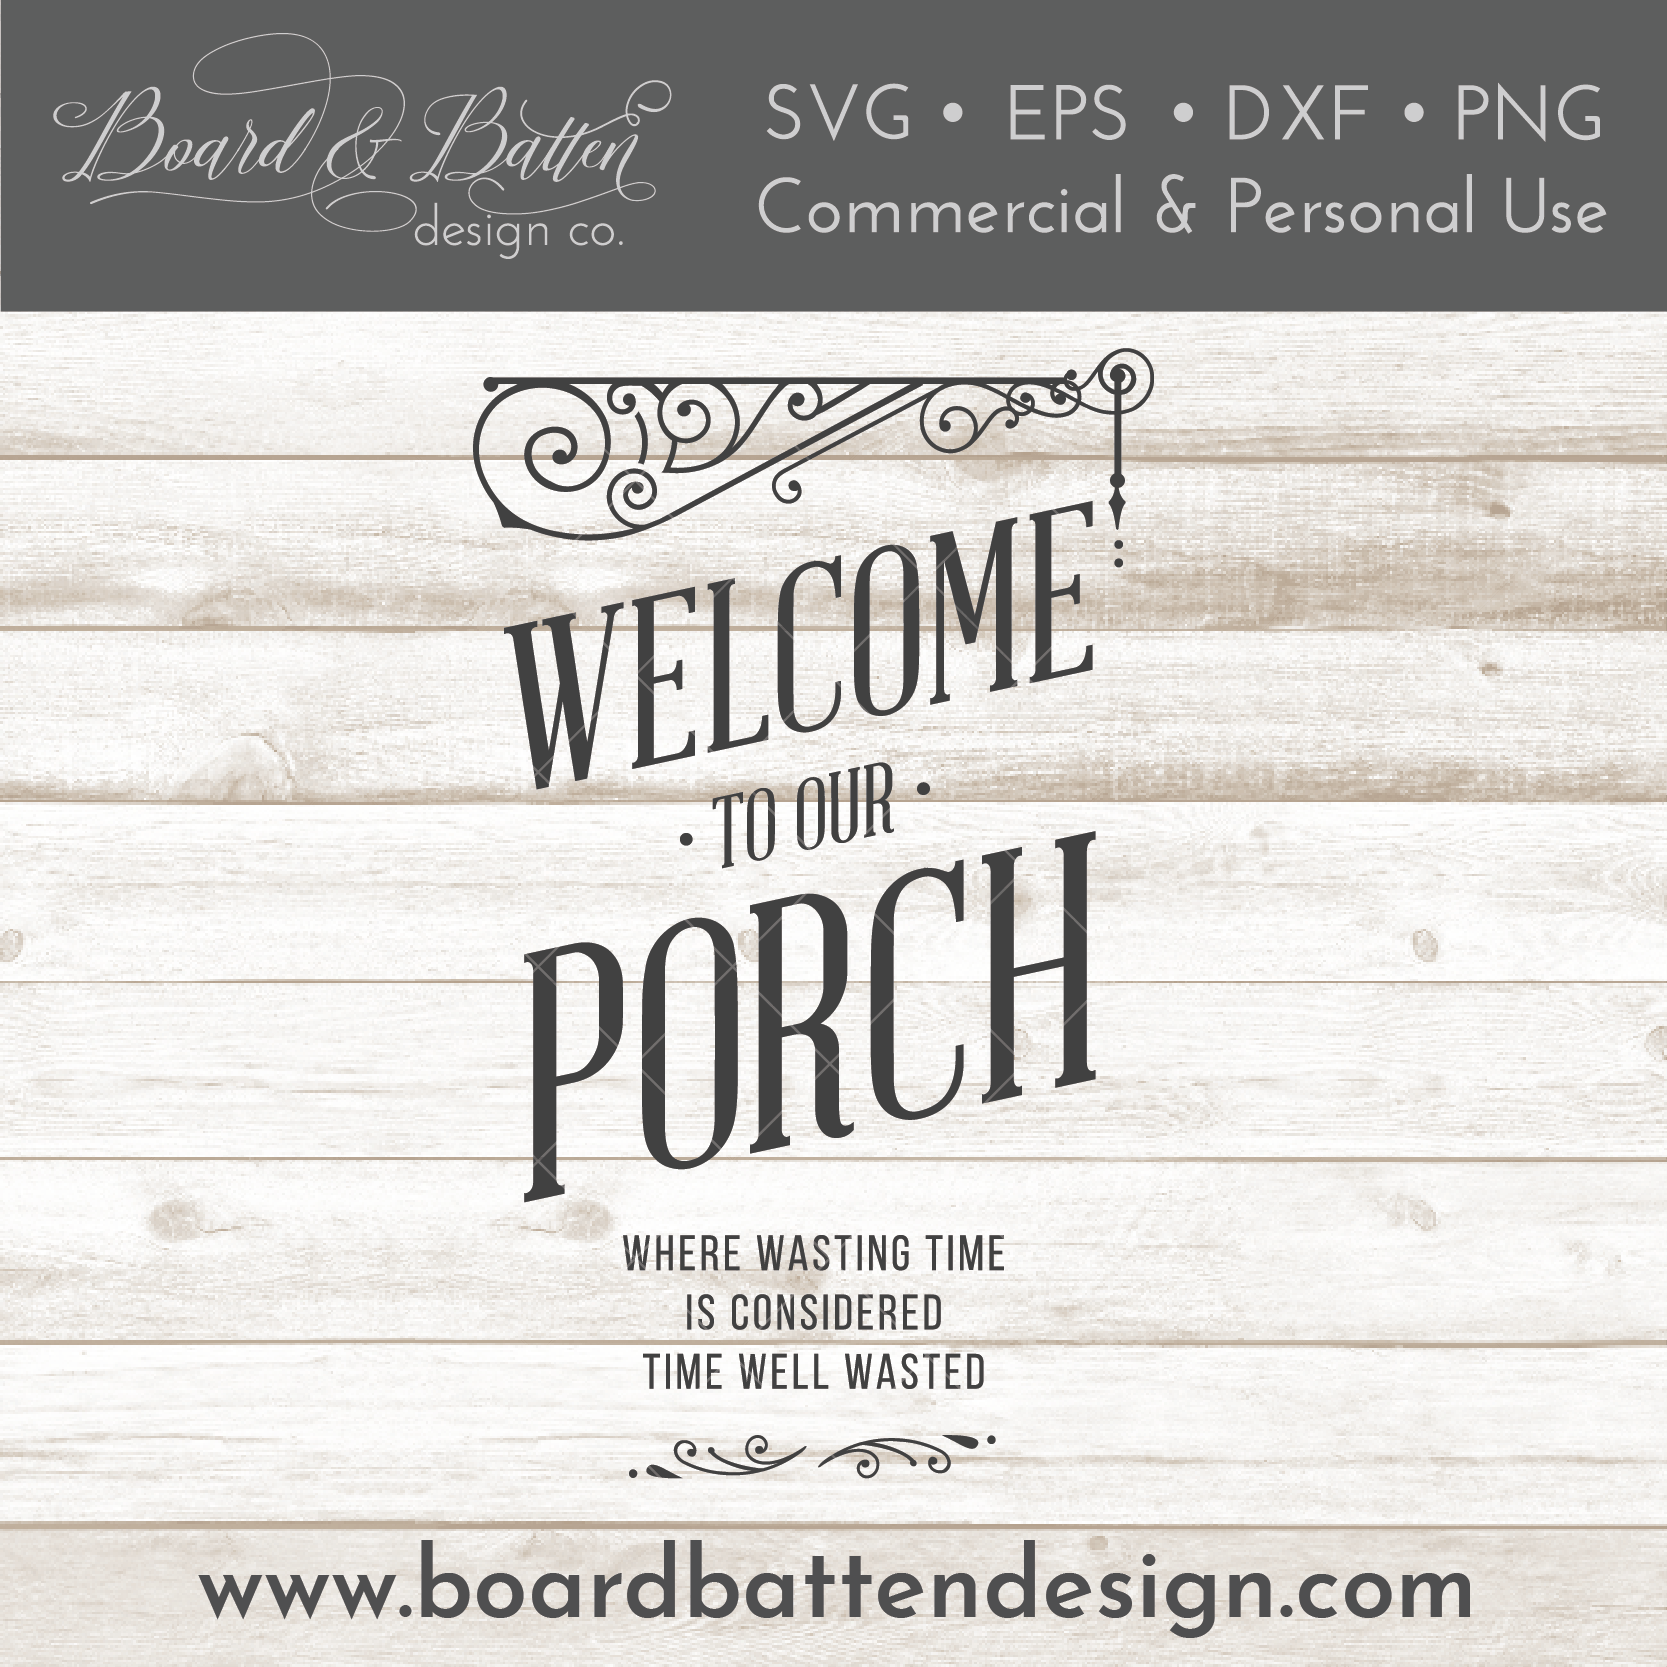 Welcome To Our Porch SVG File - Commercial Use SVG Files for Cricut & Silhouette